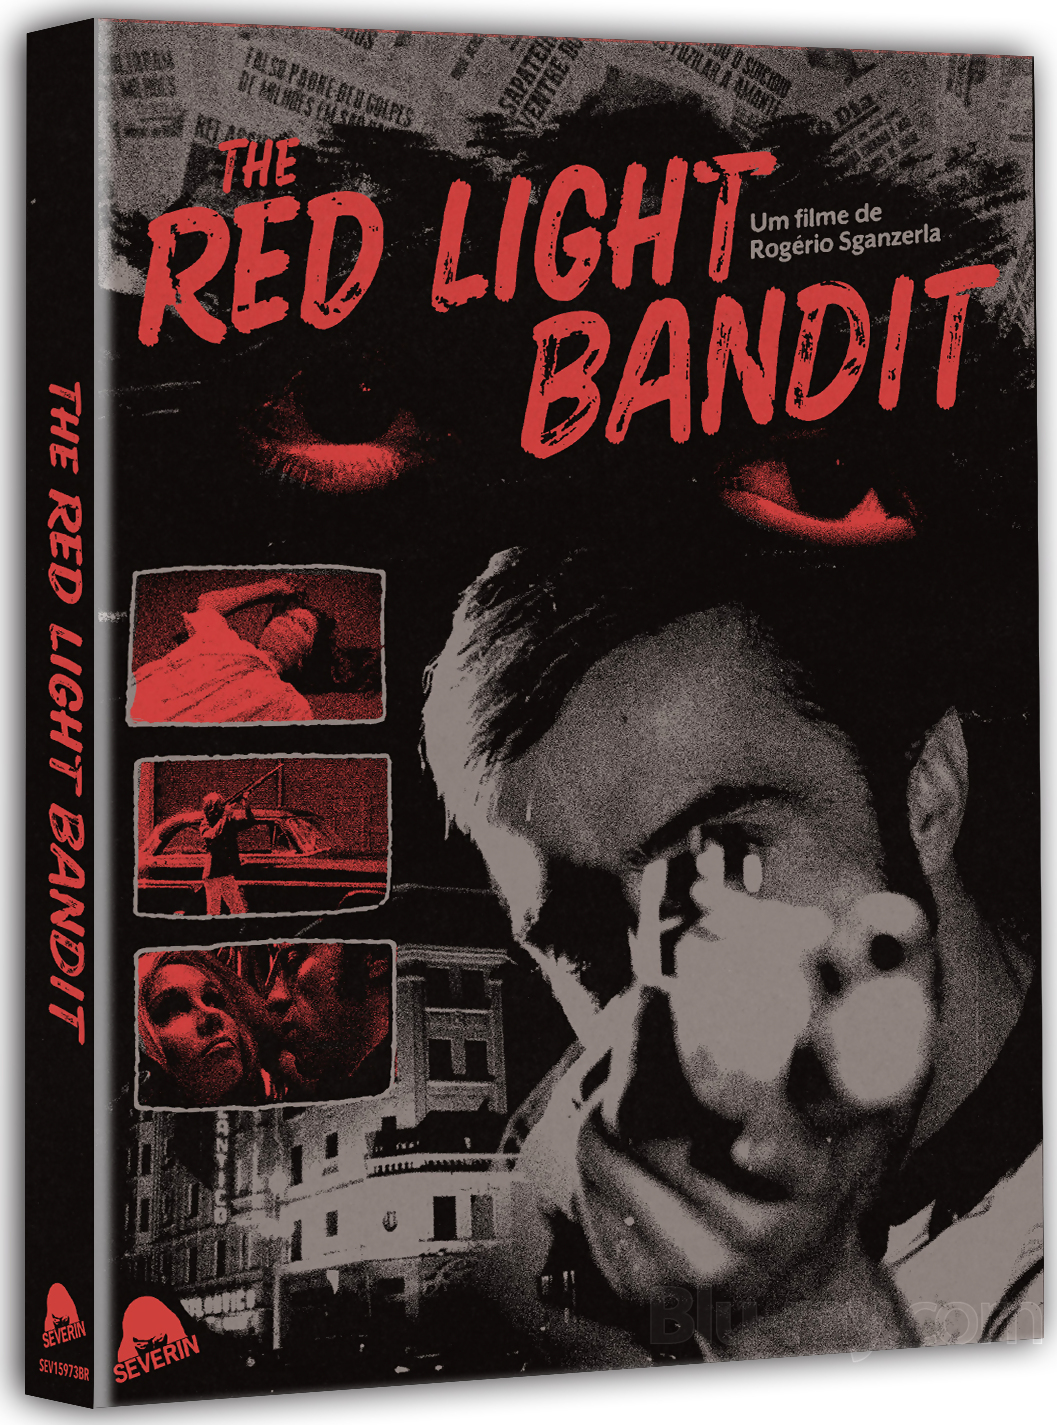 The Red Light Bandit Blu-ray